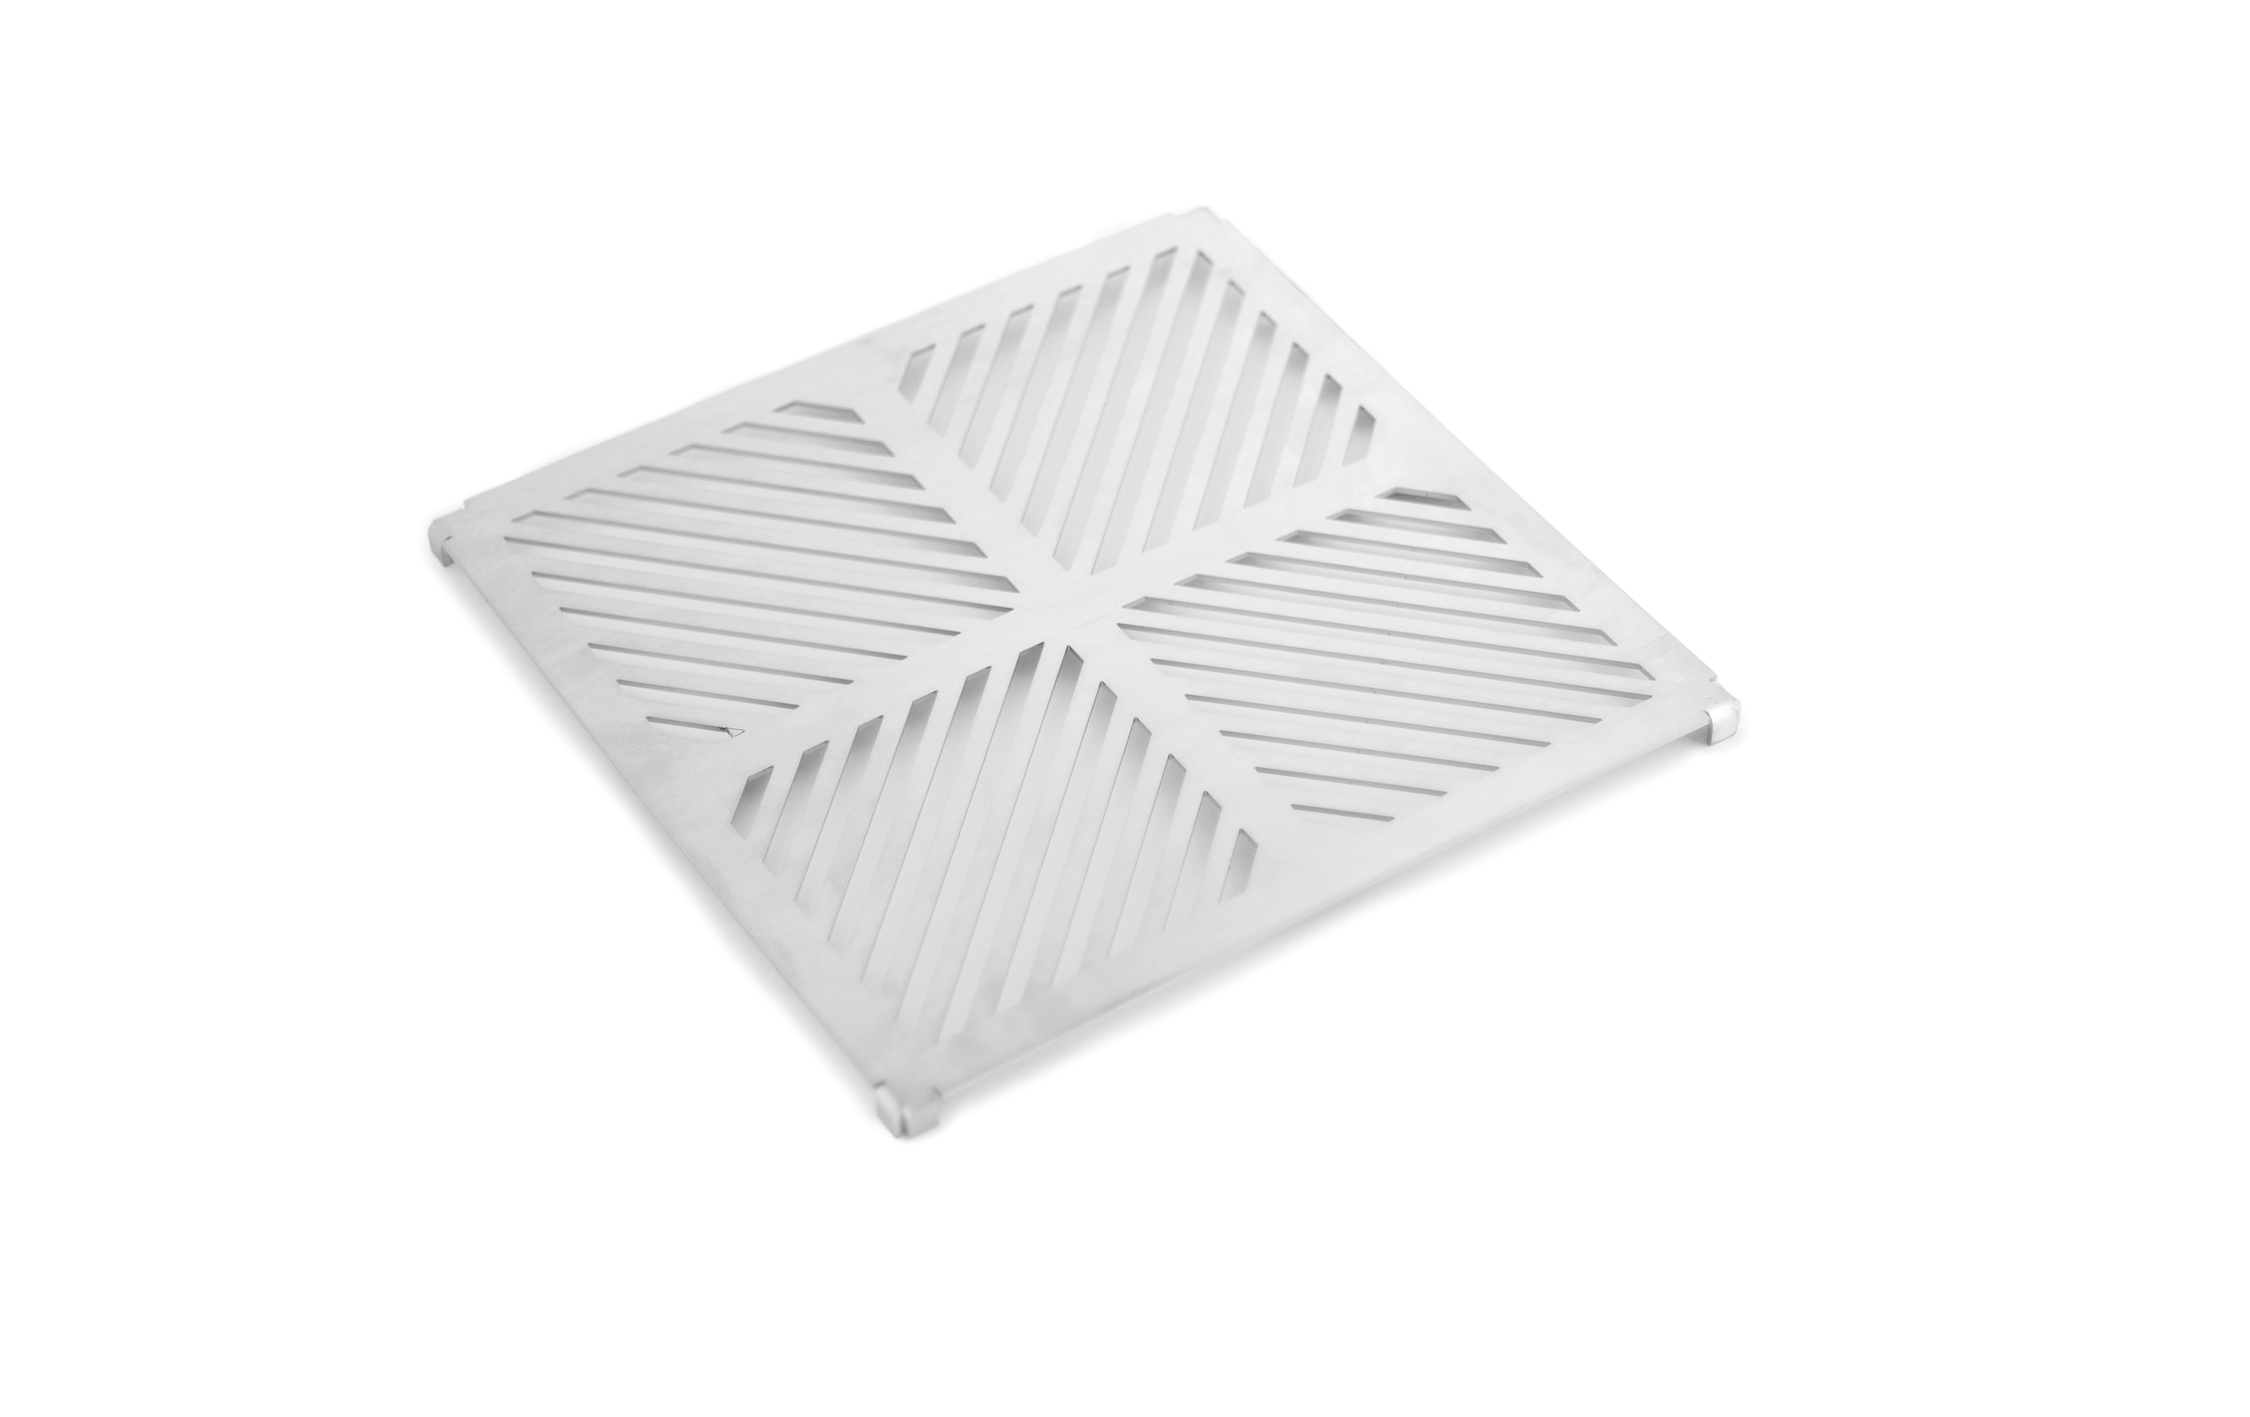 Stainless steel grill grate for "Fan Fire" fire element